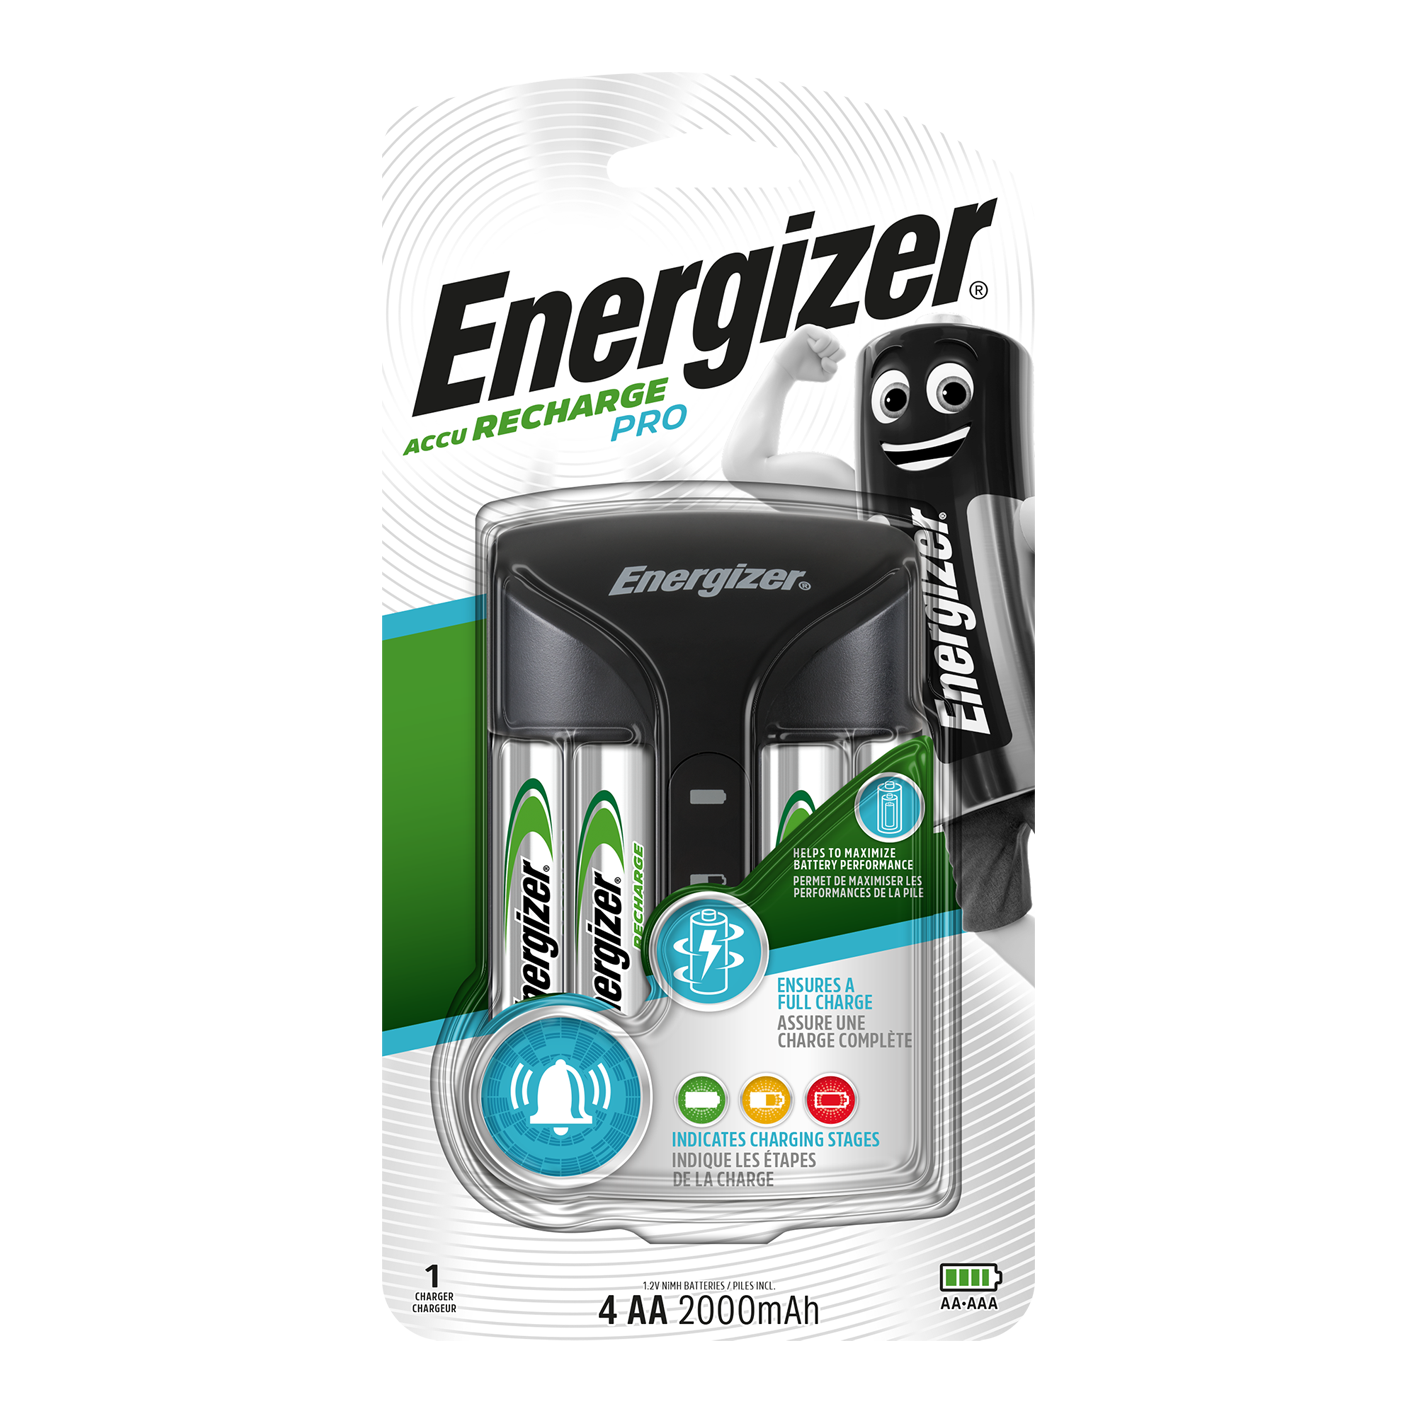 Energizer Pro Charger (UK) With 4 x Aa 2000mAh Batteries